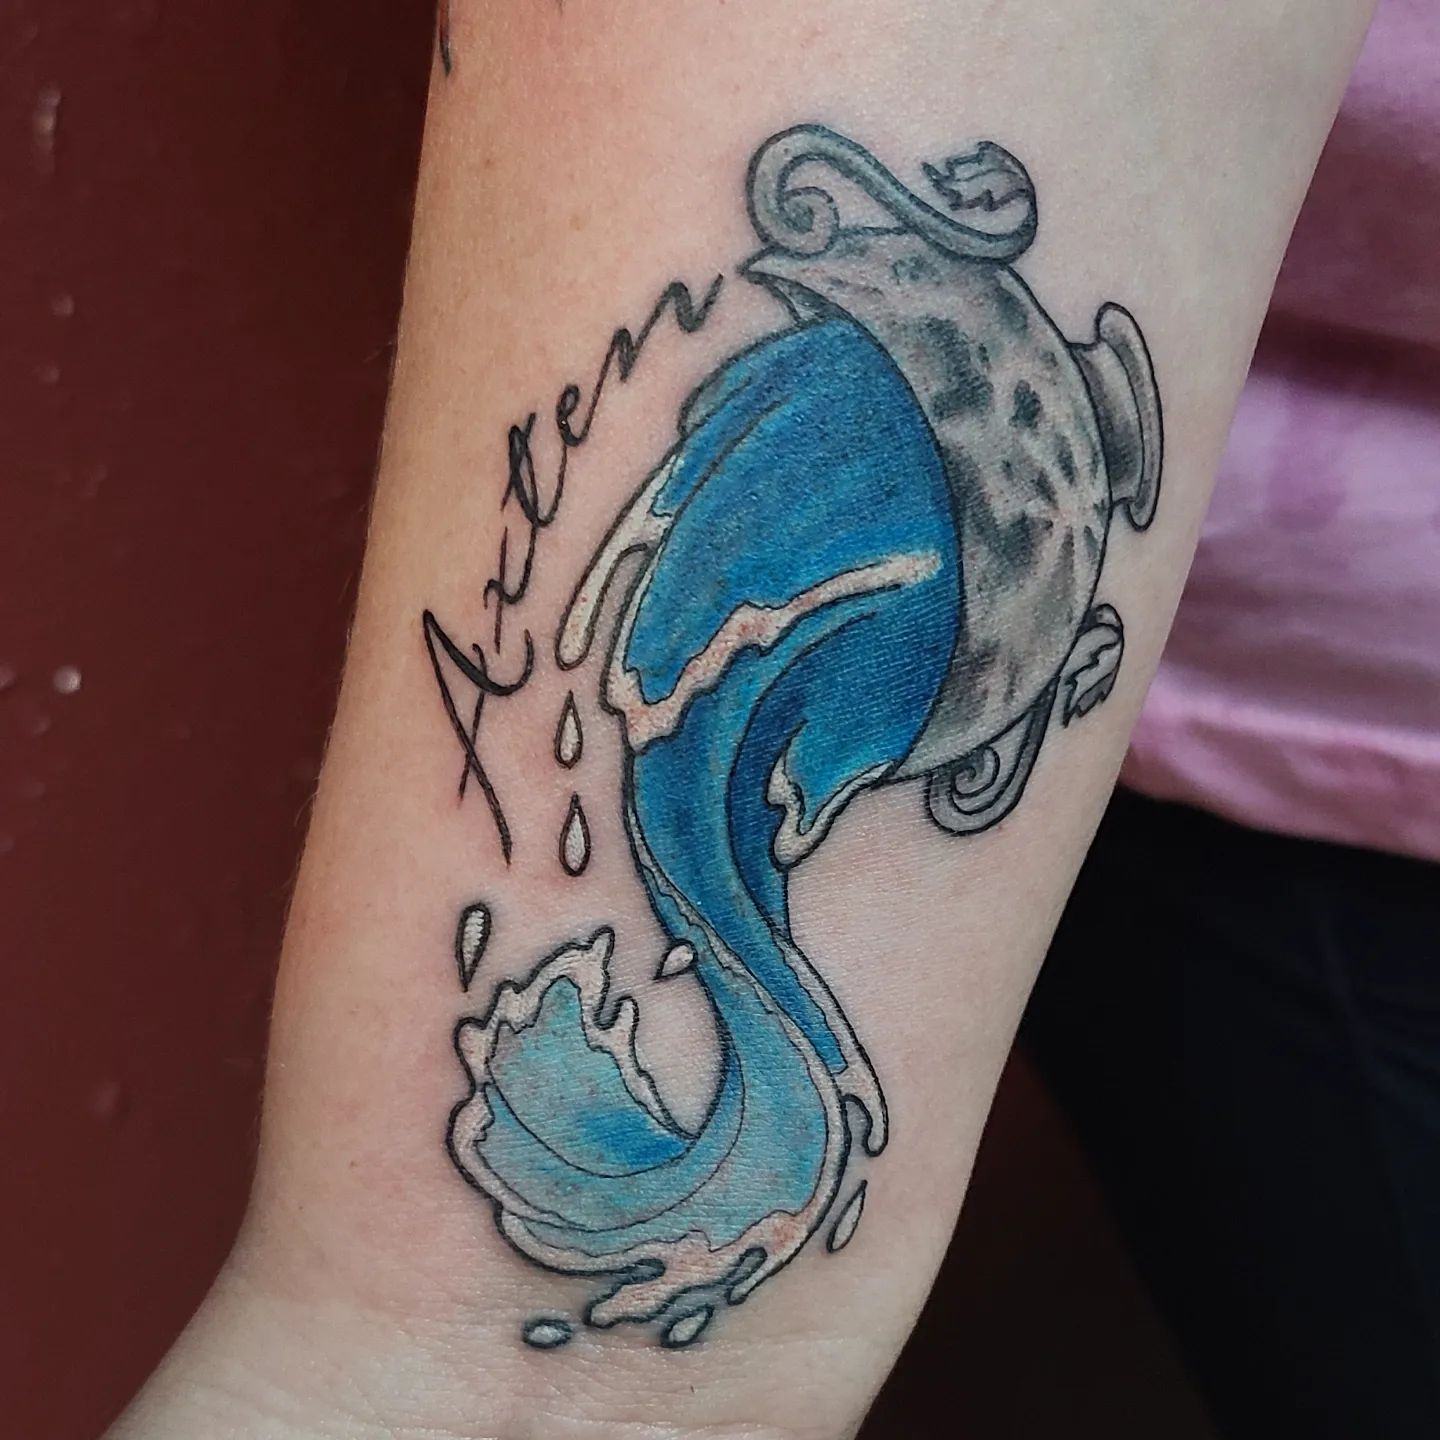 The strong image that the water creates looks super-real in this tattoo. In order to show your harsh personality with this strong running water on your body, go for this tattoo. Blue color of the water is a nice detail with its shading, too.